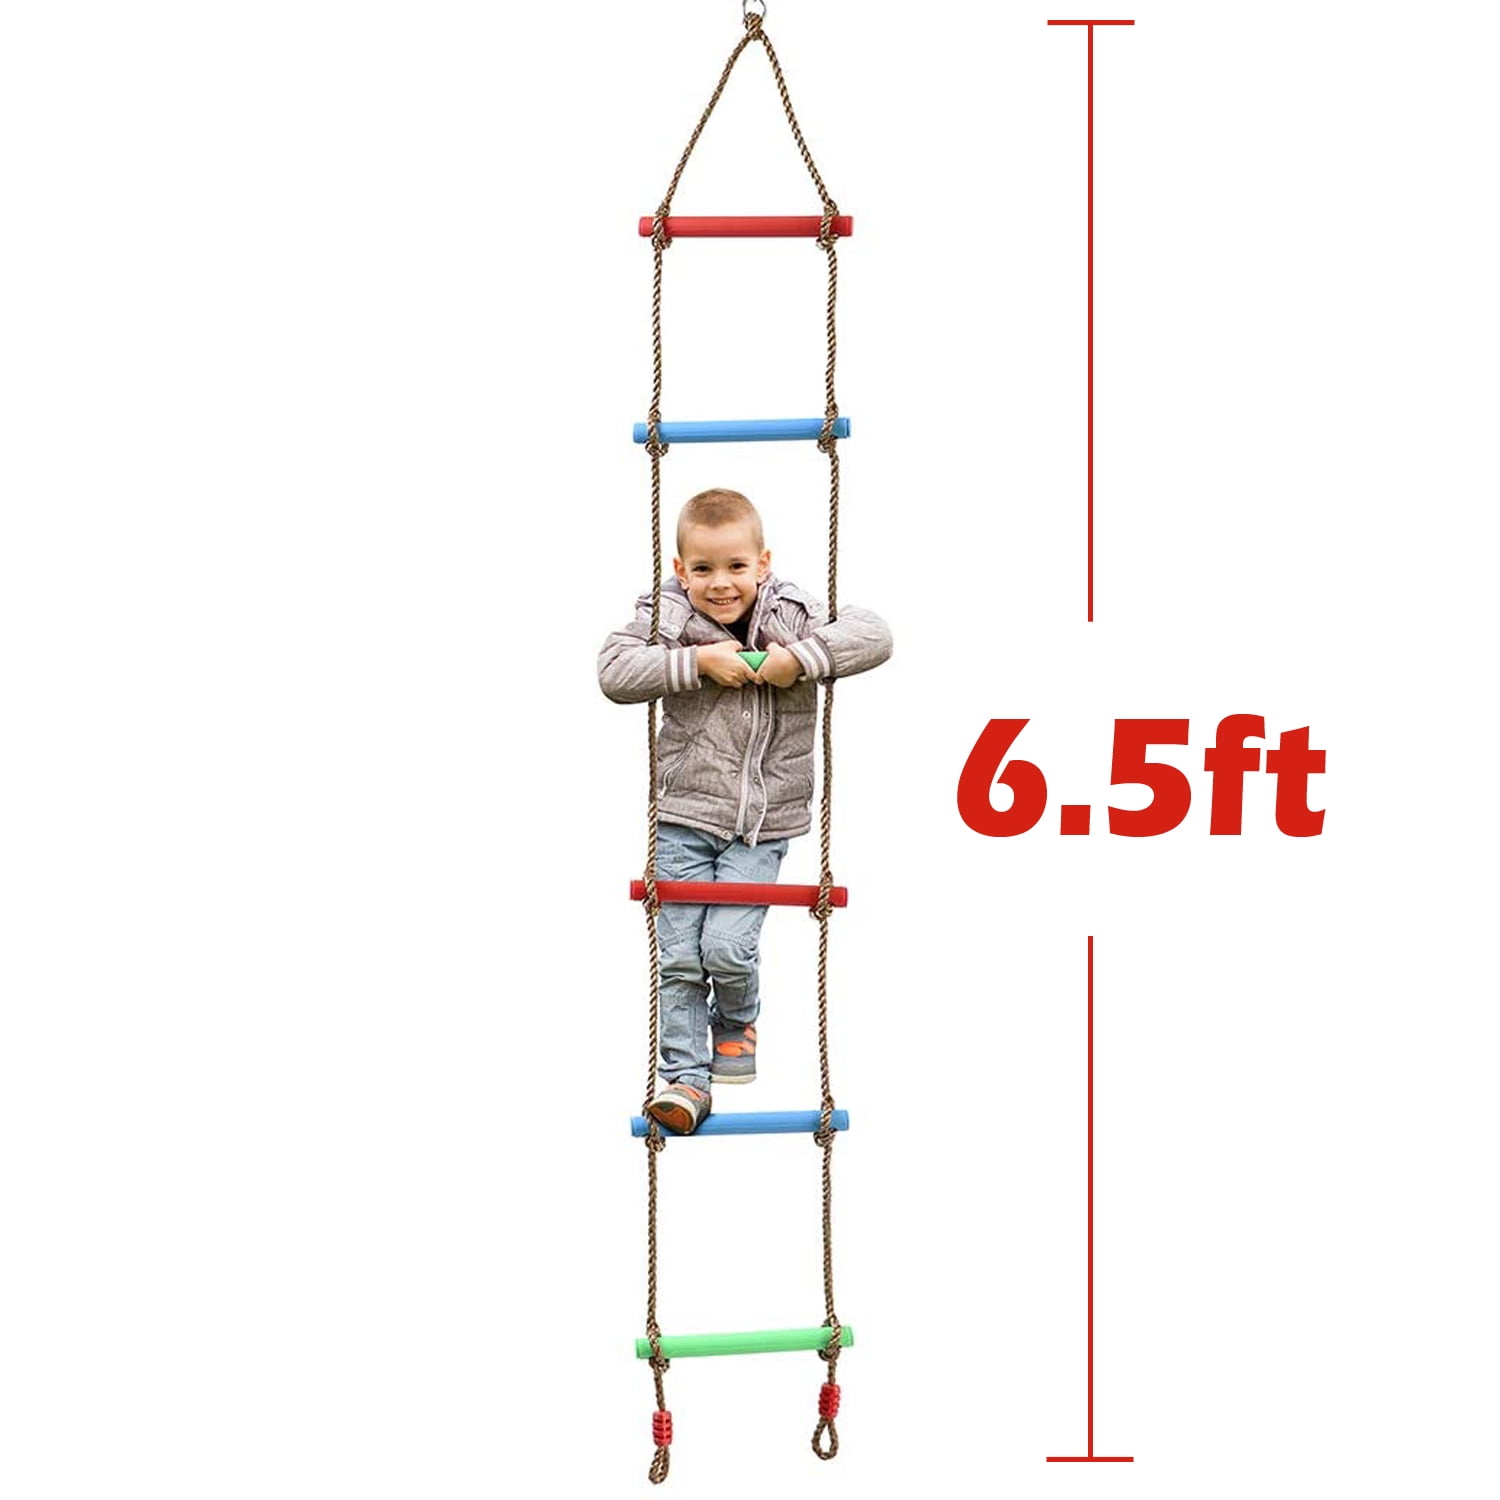 Outdoor Six-section Children Kids Rope Climbing Ladder Toy Exercise Equipment 